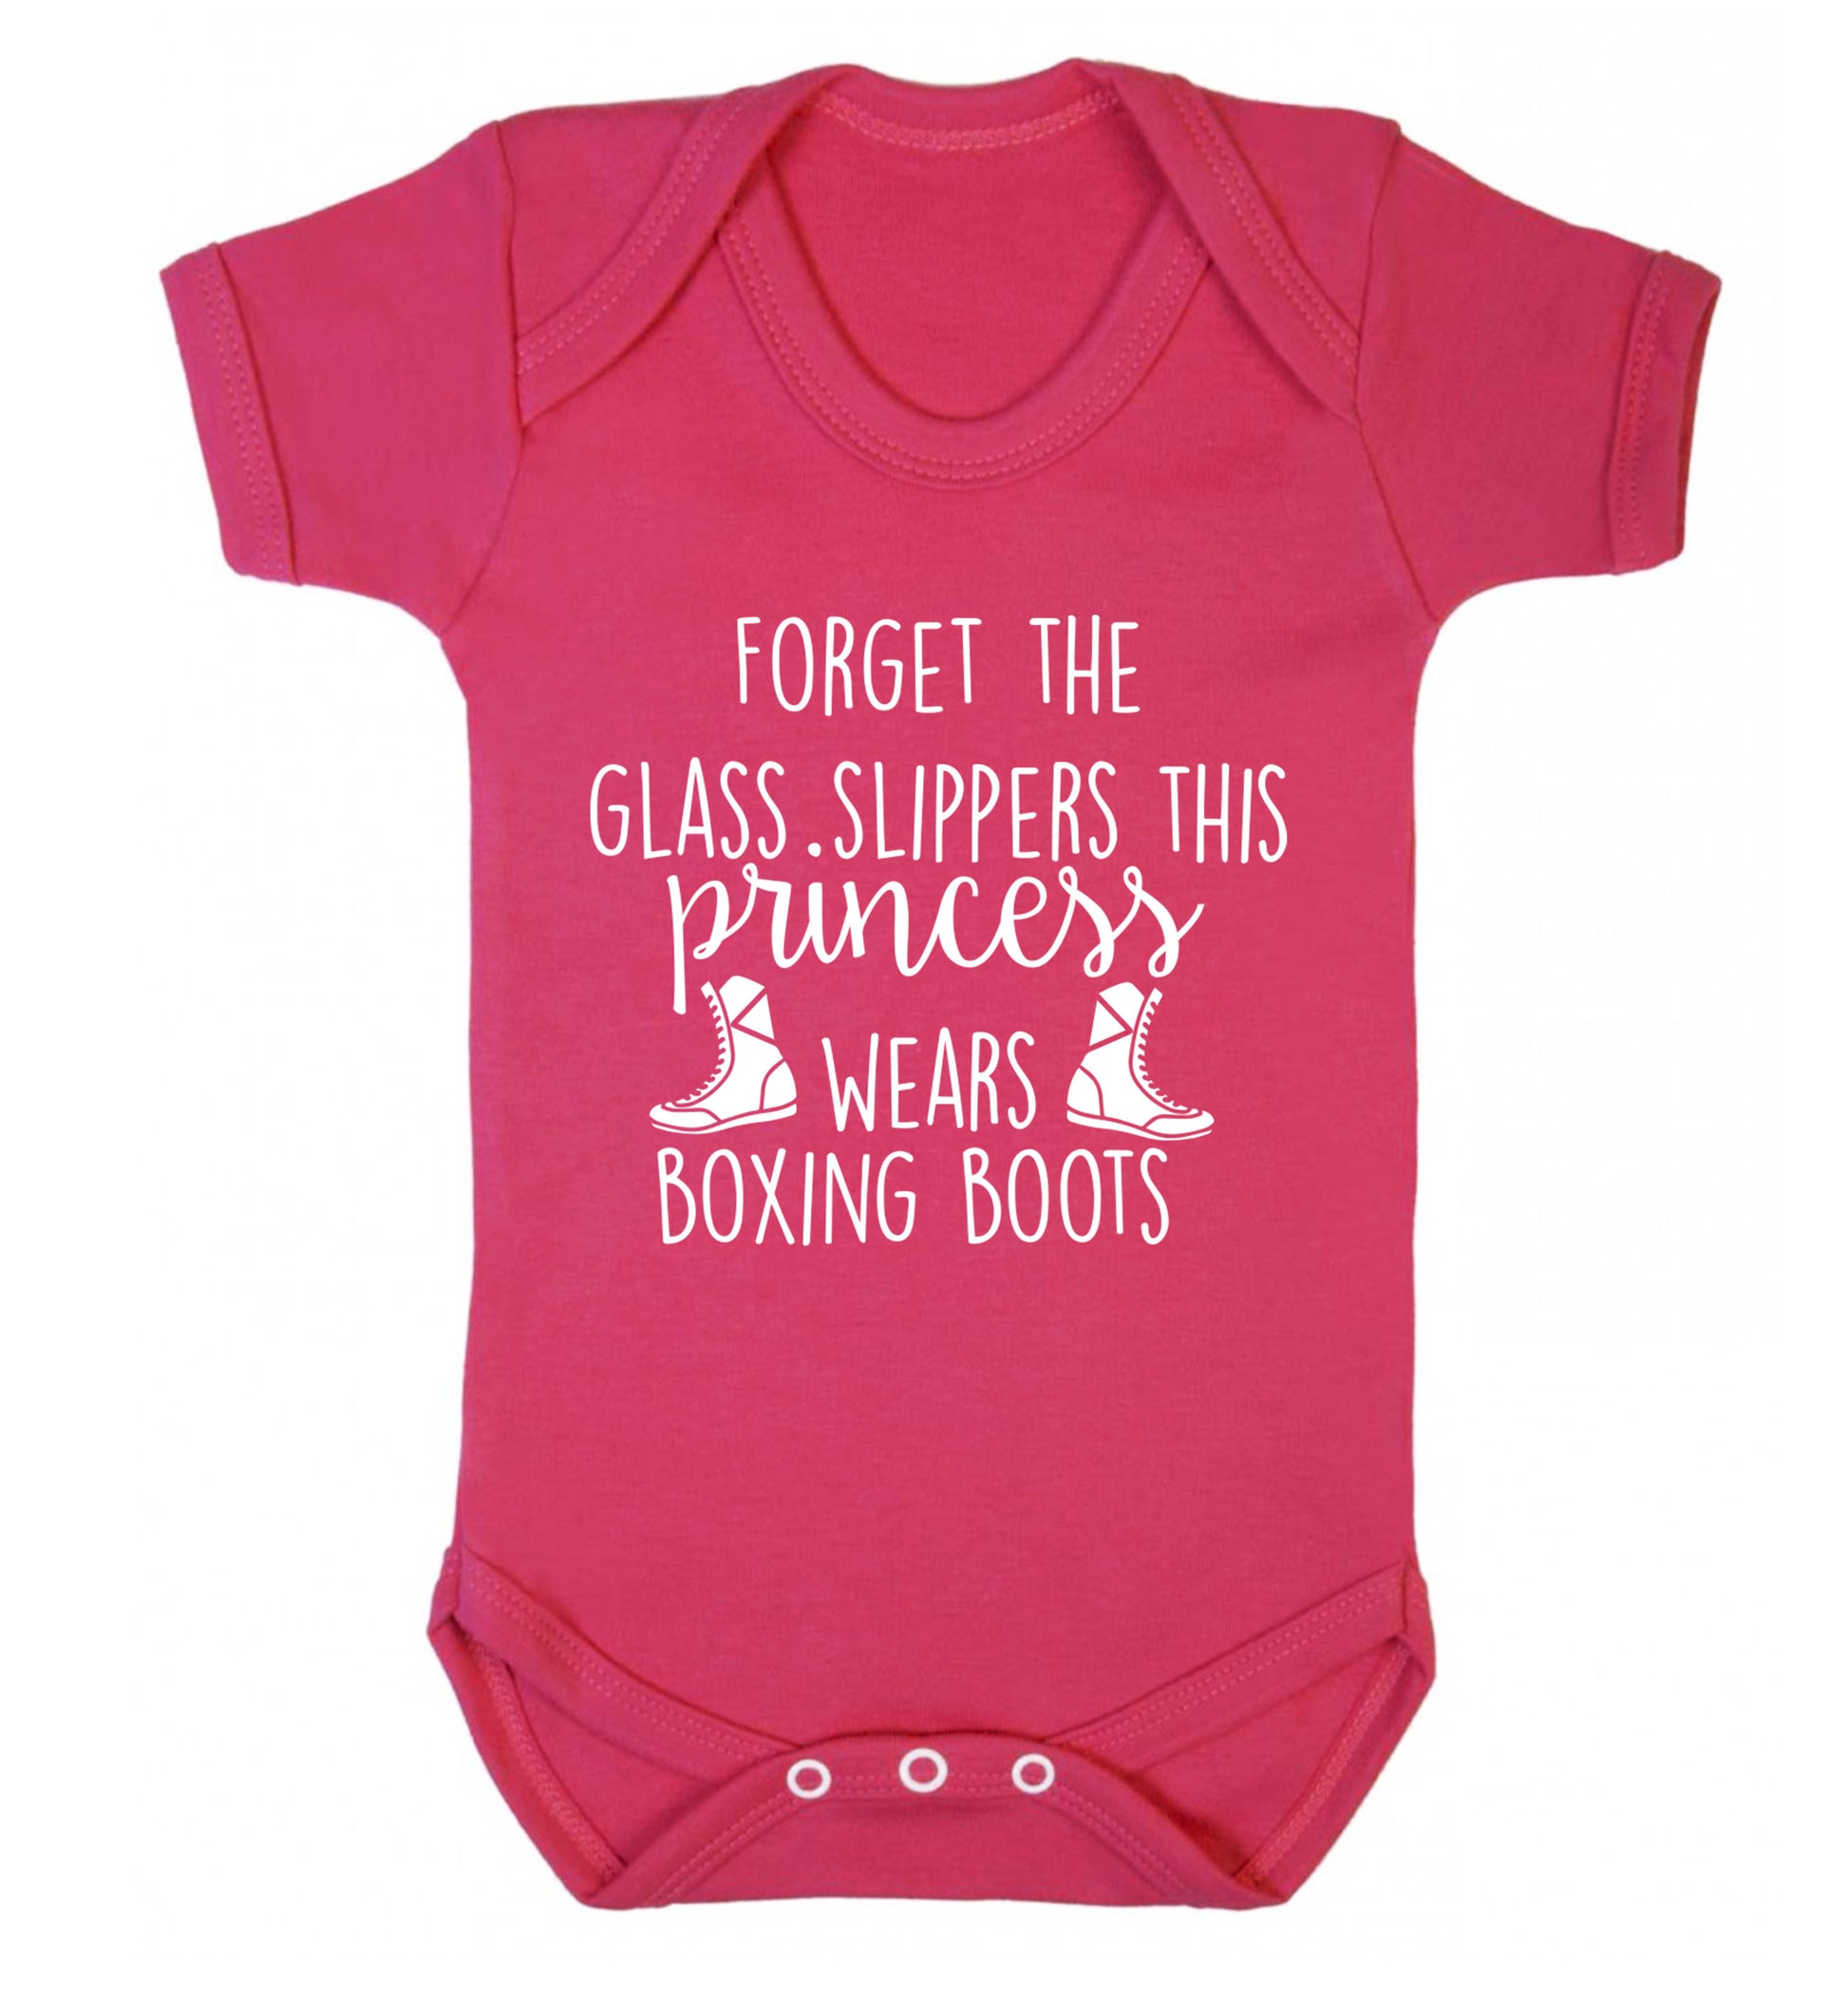 Forget the glass slippers this princess wears boxing boots Baby Vest dark pink 18-24 months